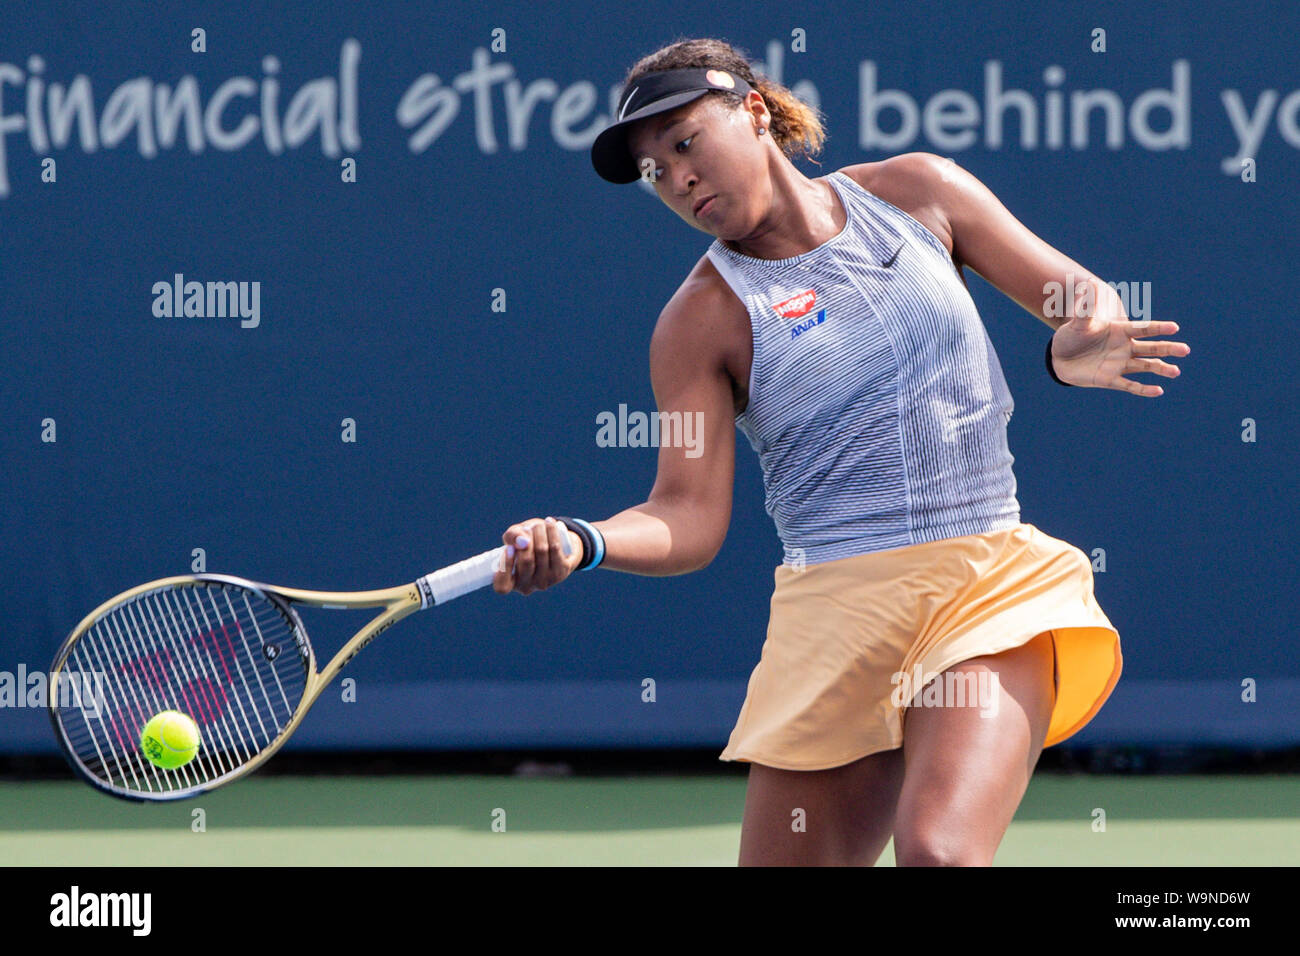 Mason, Ohio, USA. 14th Aug, 2019. Naomi Osaka (JPN) hits a forehand shot during Wednesday's round of the Western and Southern Open at the Lindner Family Tennis Center, Mason, Oh. Credit: Scott Stuart/ZUMA Wire/Alamy Live News Stock Photo